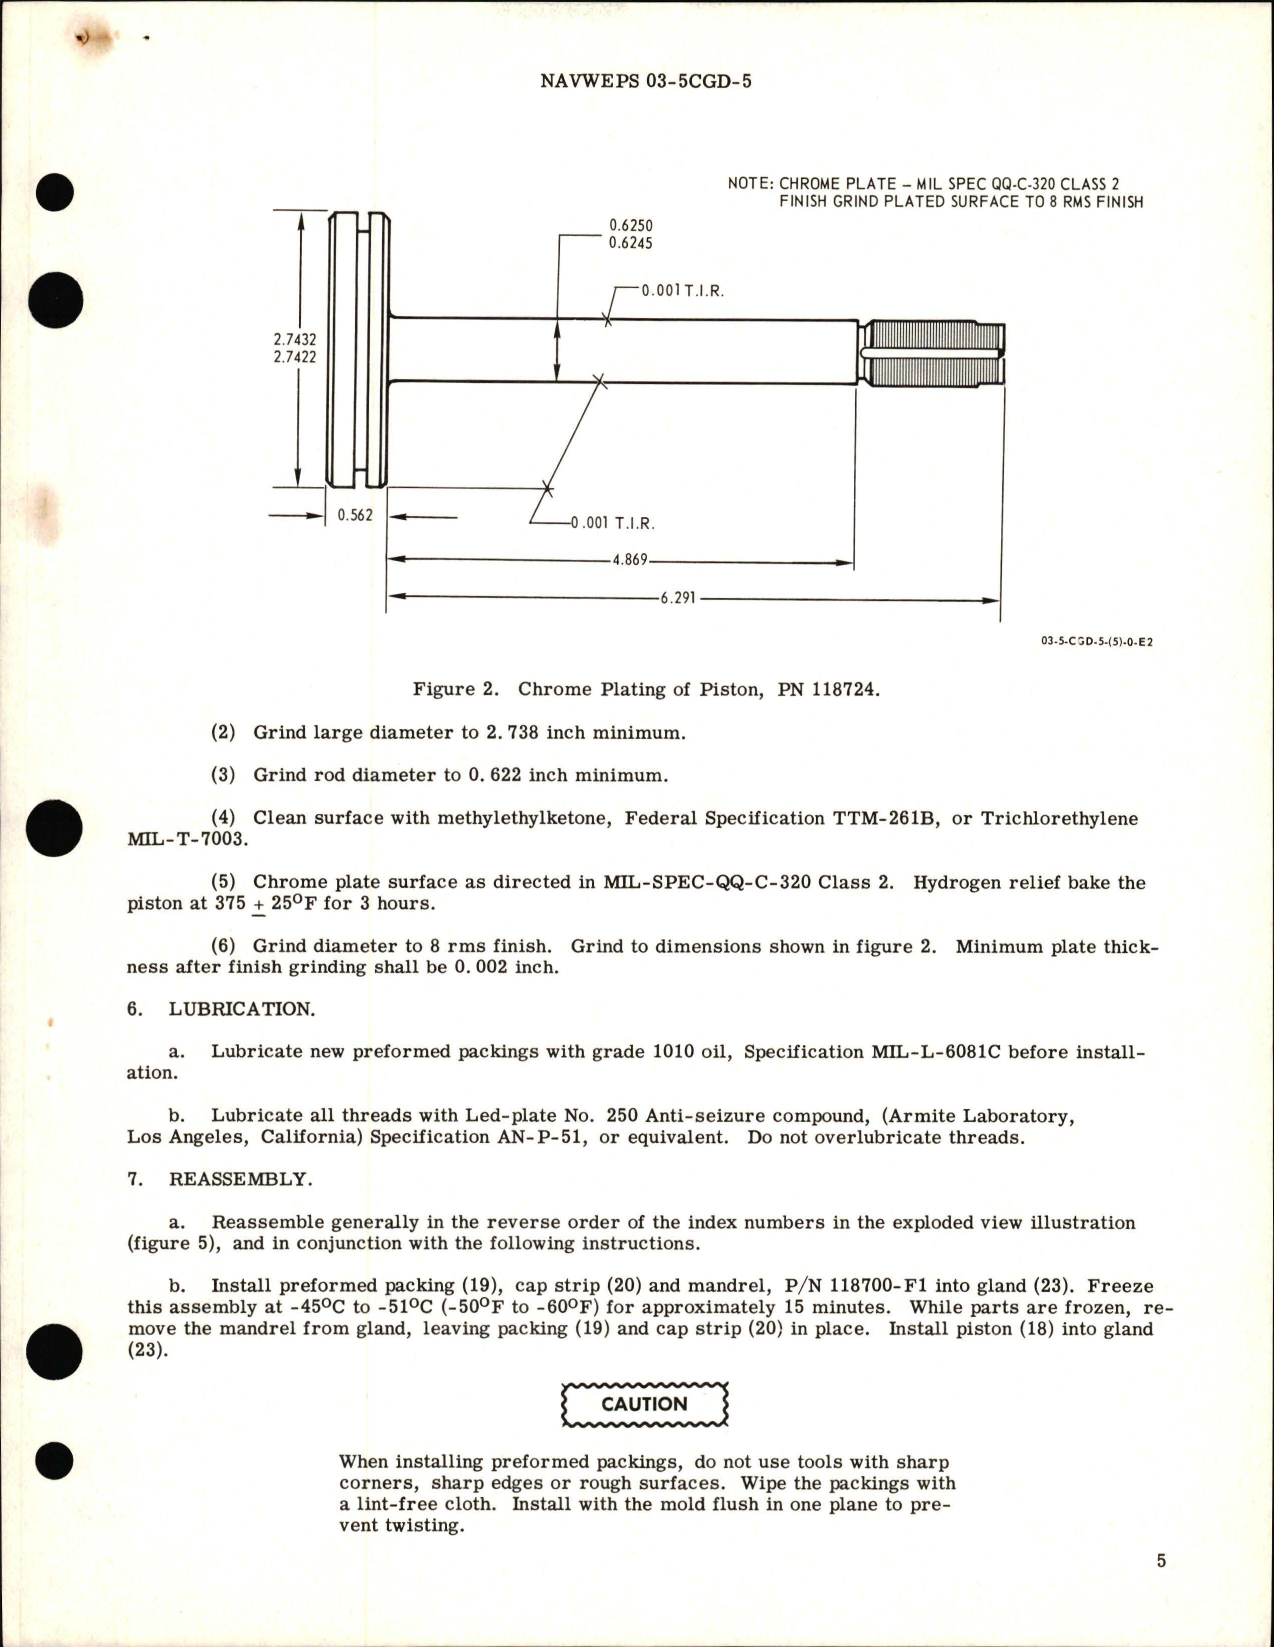 Sample page 5 from AirCorps Library document: Overhaul Instructions with Parts Breakdown for Inlet Guide Vane Fuel Actuator - Model 1187-0 